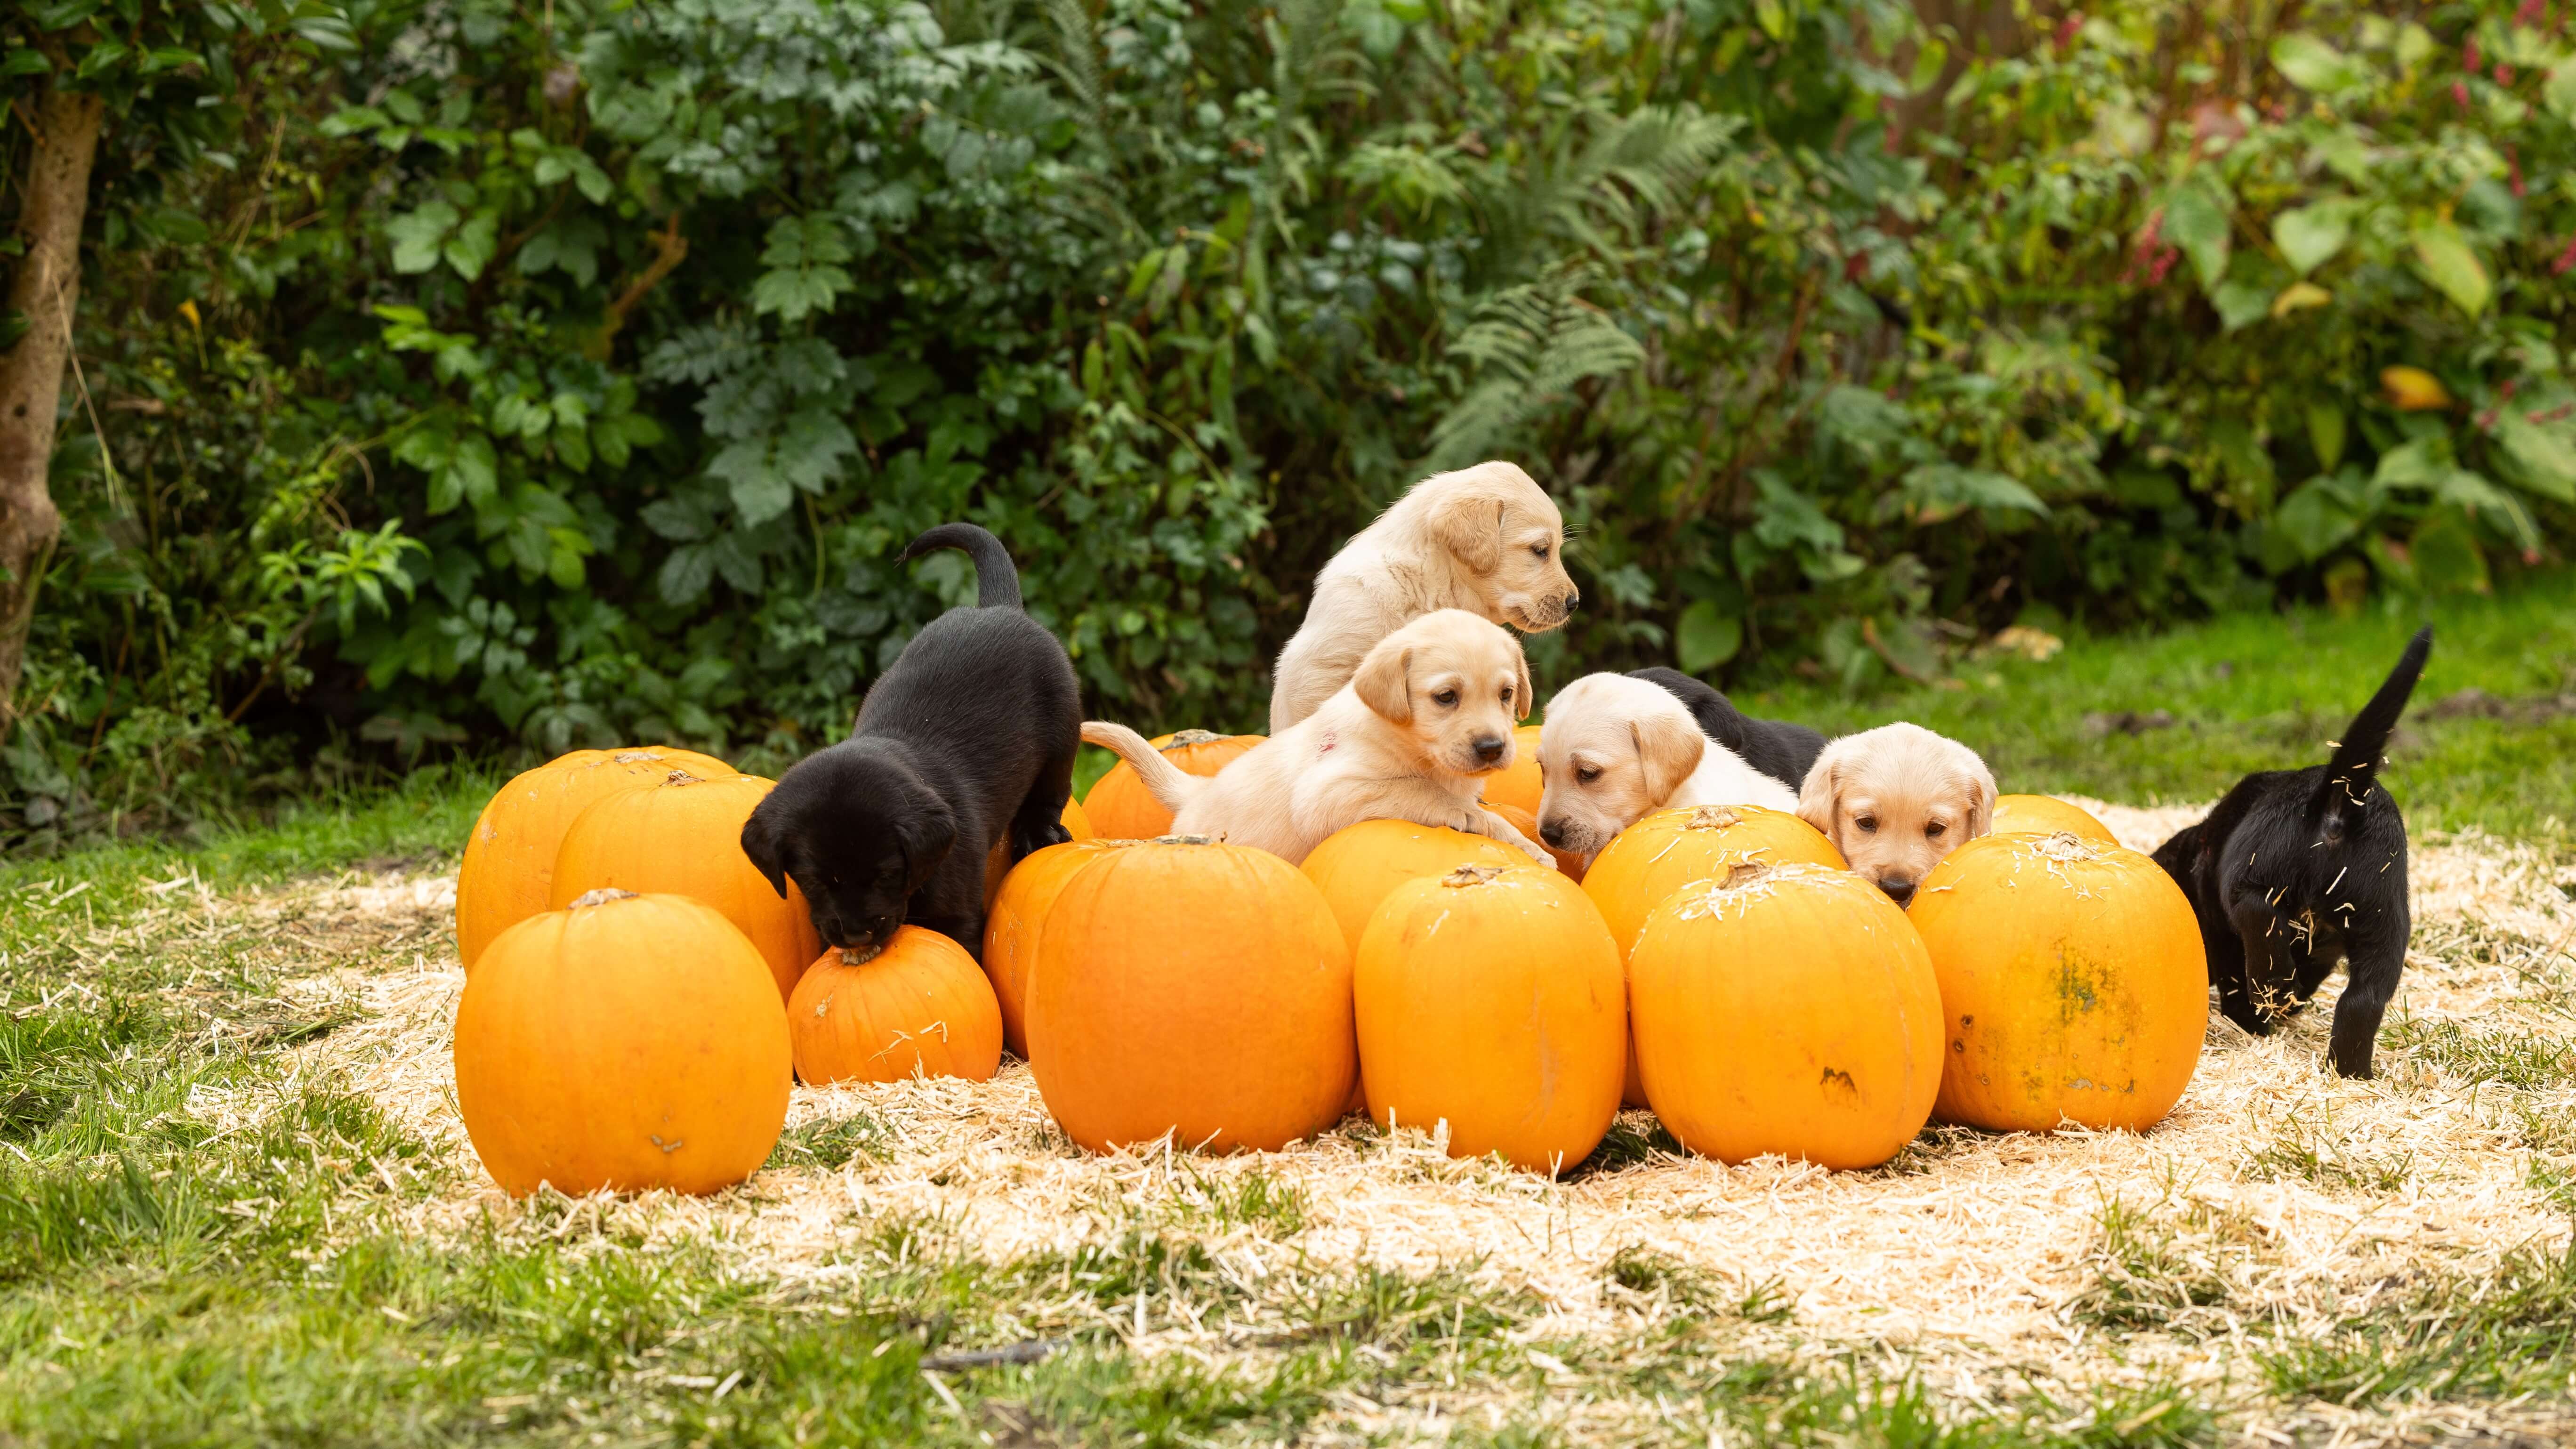 Eight five-week-old yellow and black Labradors play in a pumpkin patch and straw in a garden